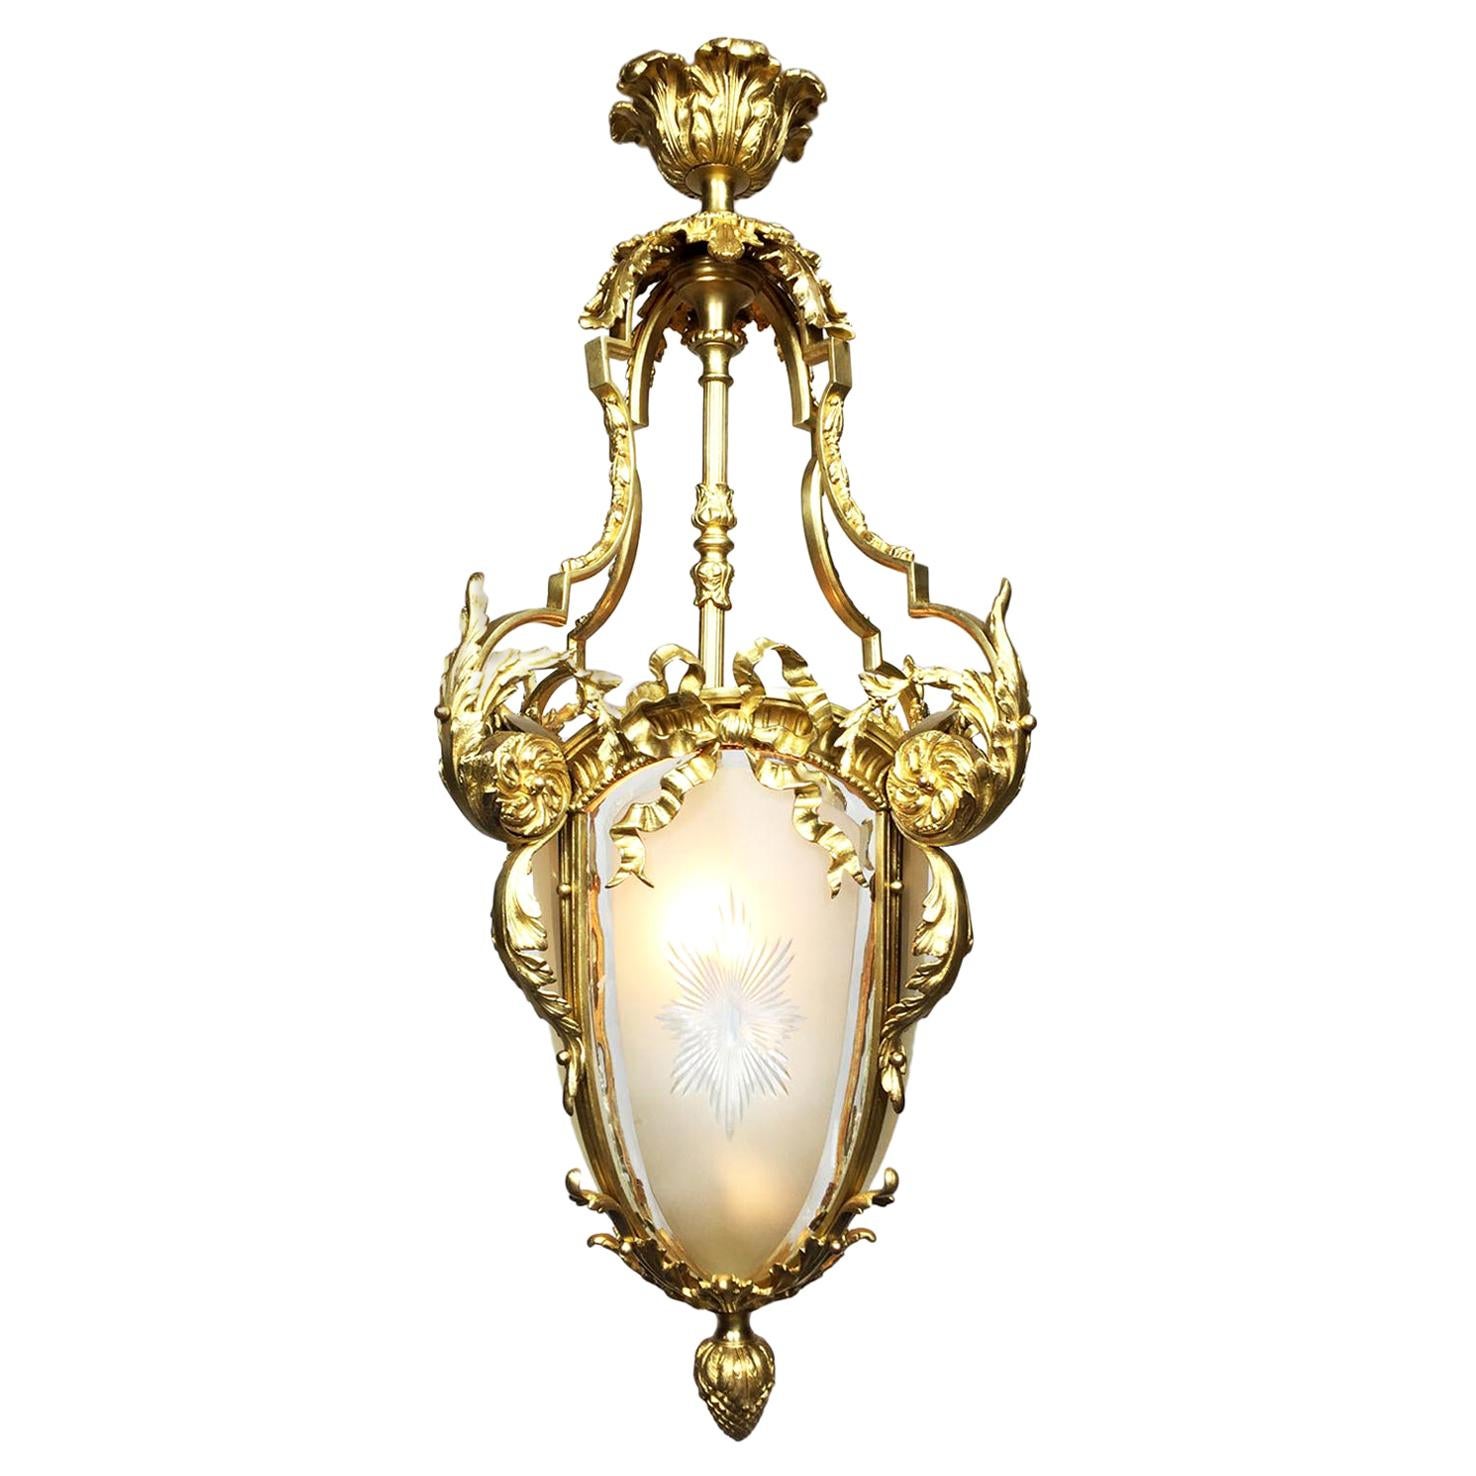 French, 19th-20th Century Louis XV Style Gilt Bronze and Glass Lantern For Sale